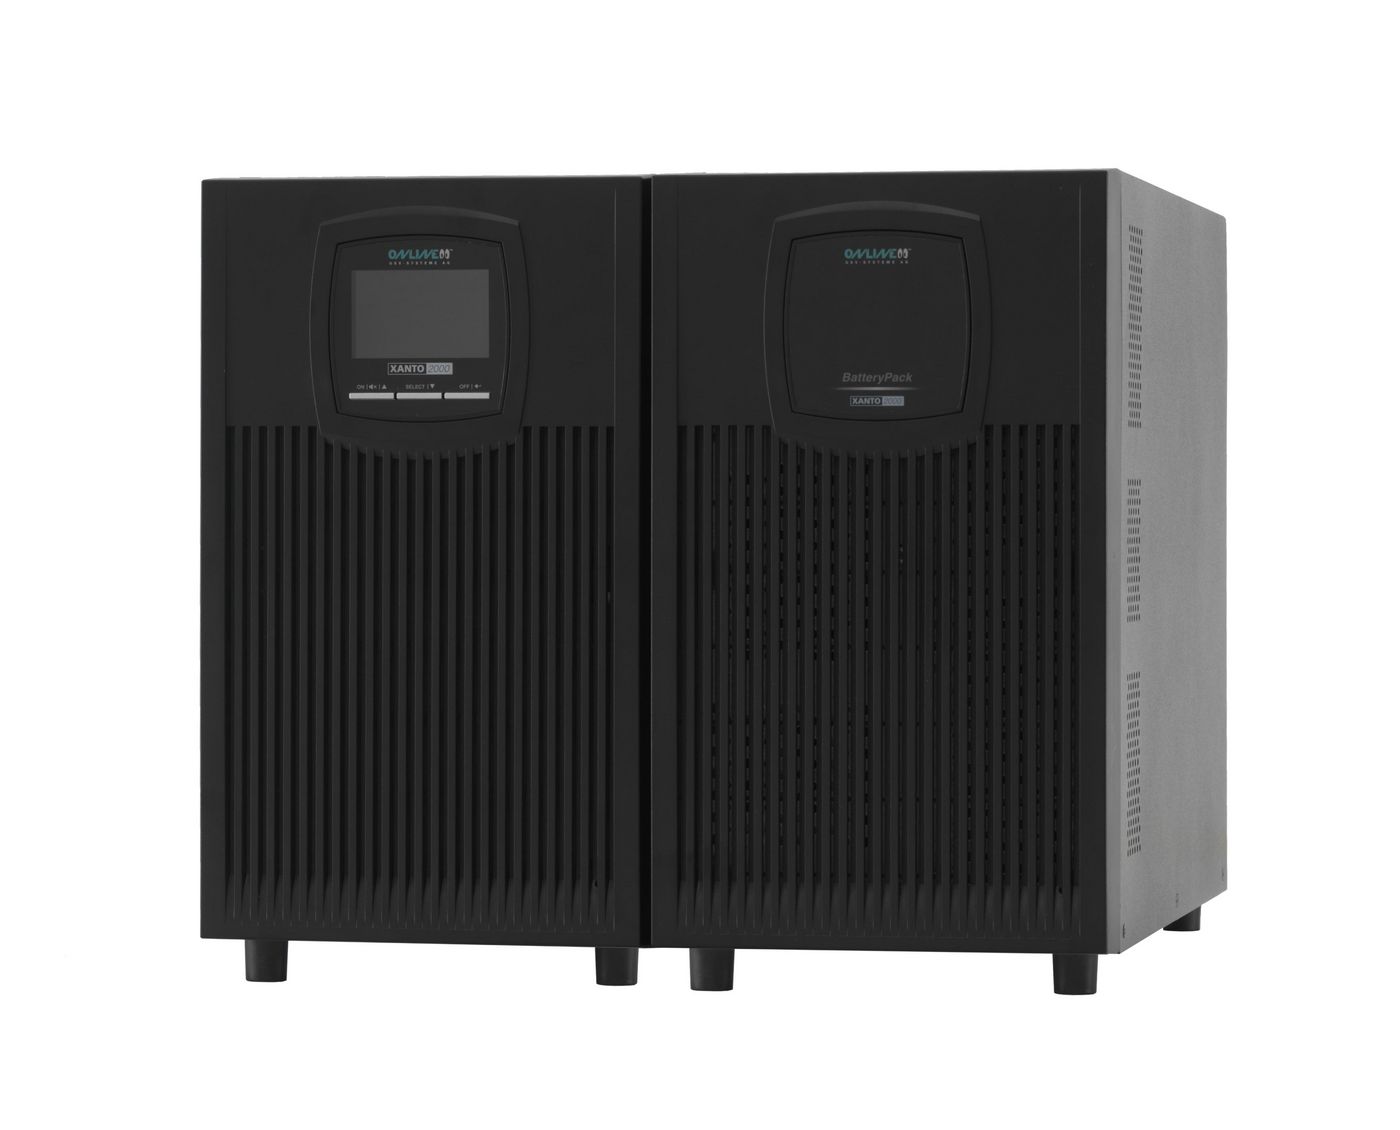 Online-USV-Systeme X2000BP W128279367 Ups Battery Cabinet Tower 